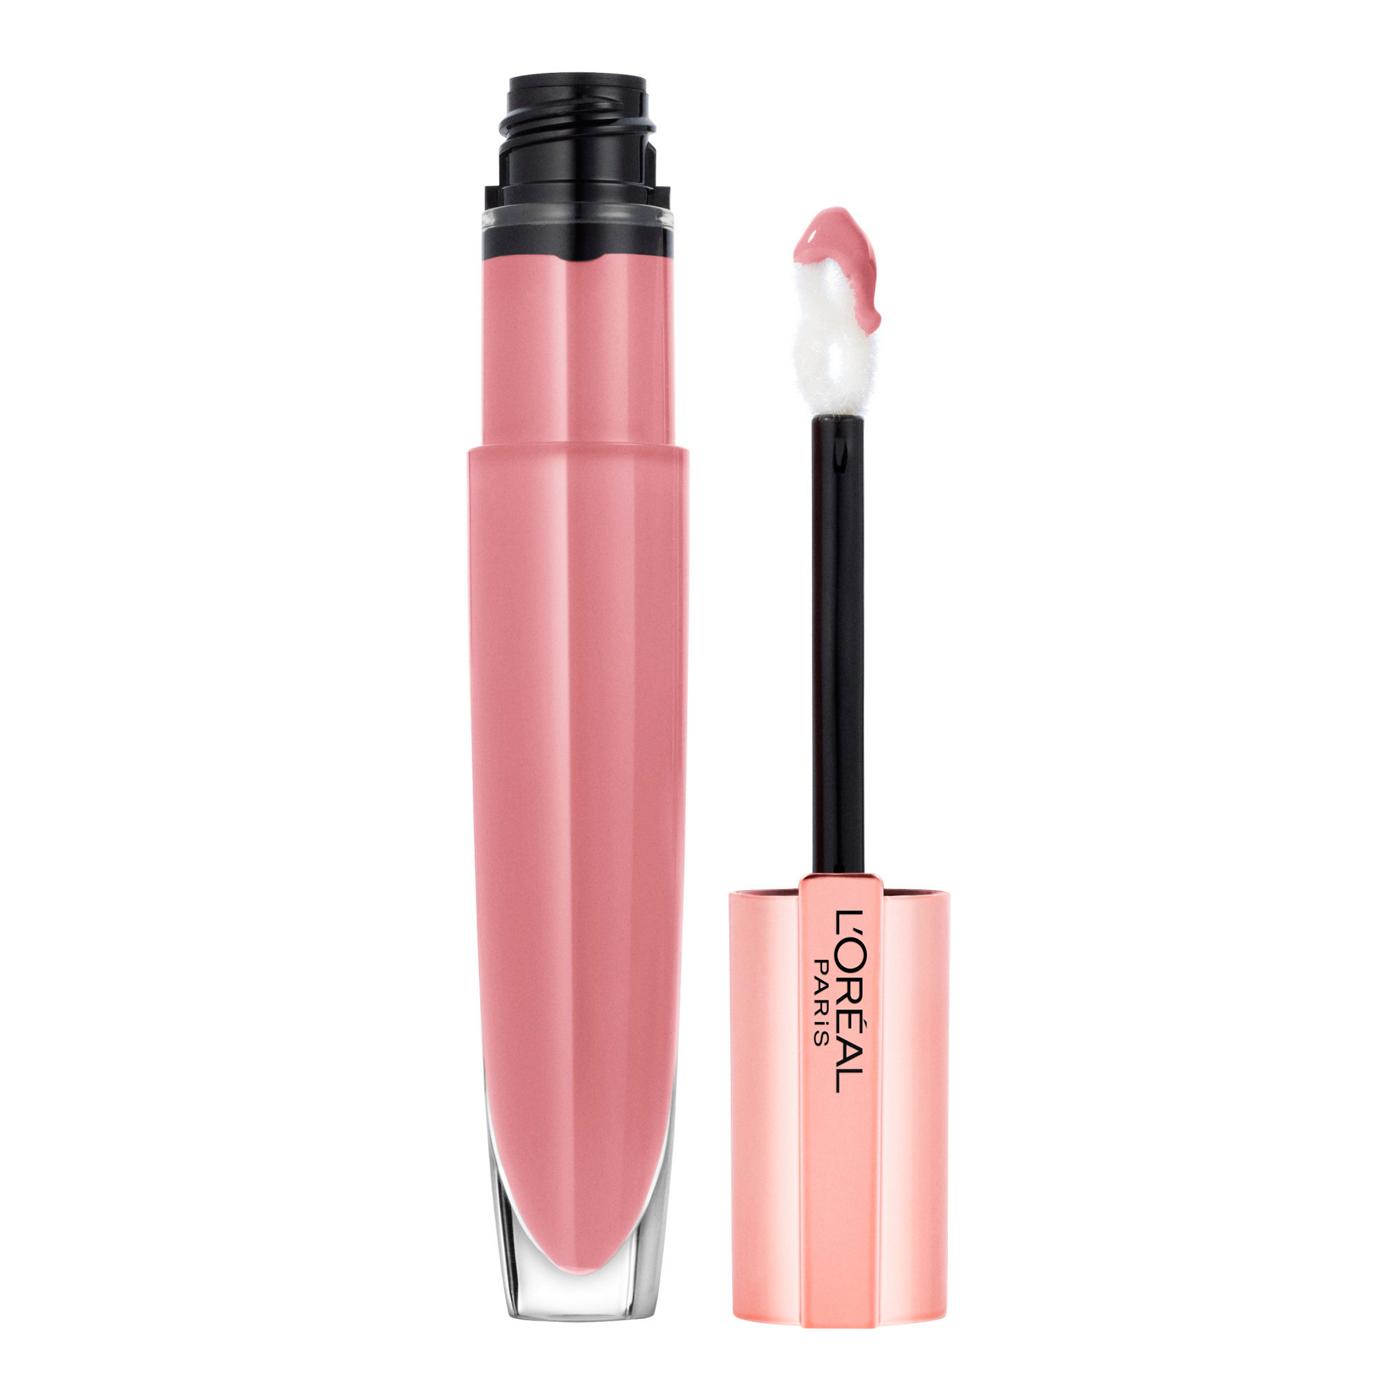 L'Oréal Paris Glow Paradise  Lip Balm-in-Gloss Pomegranate Extract Blissful Blush; image 1 of 6